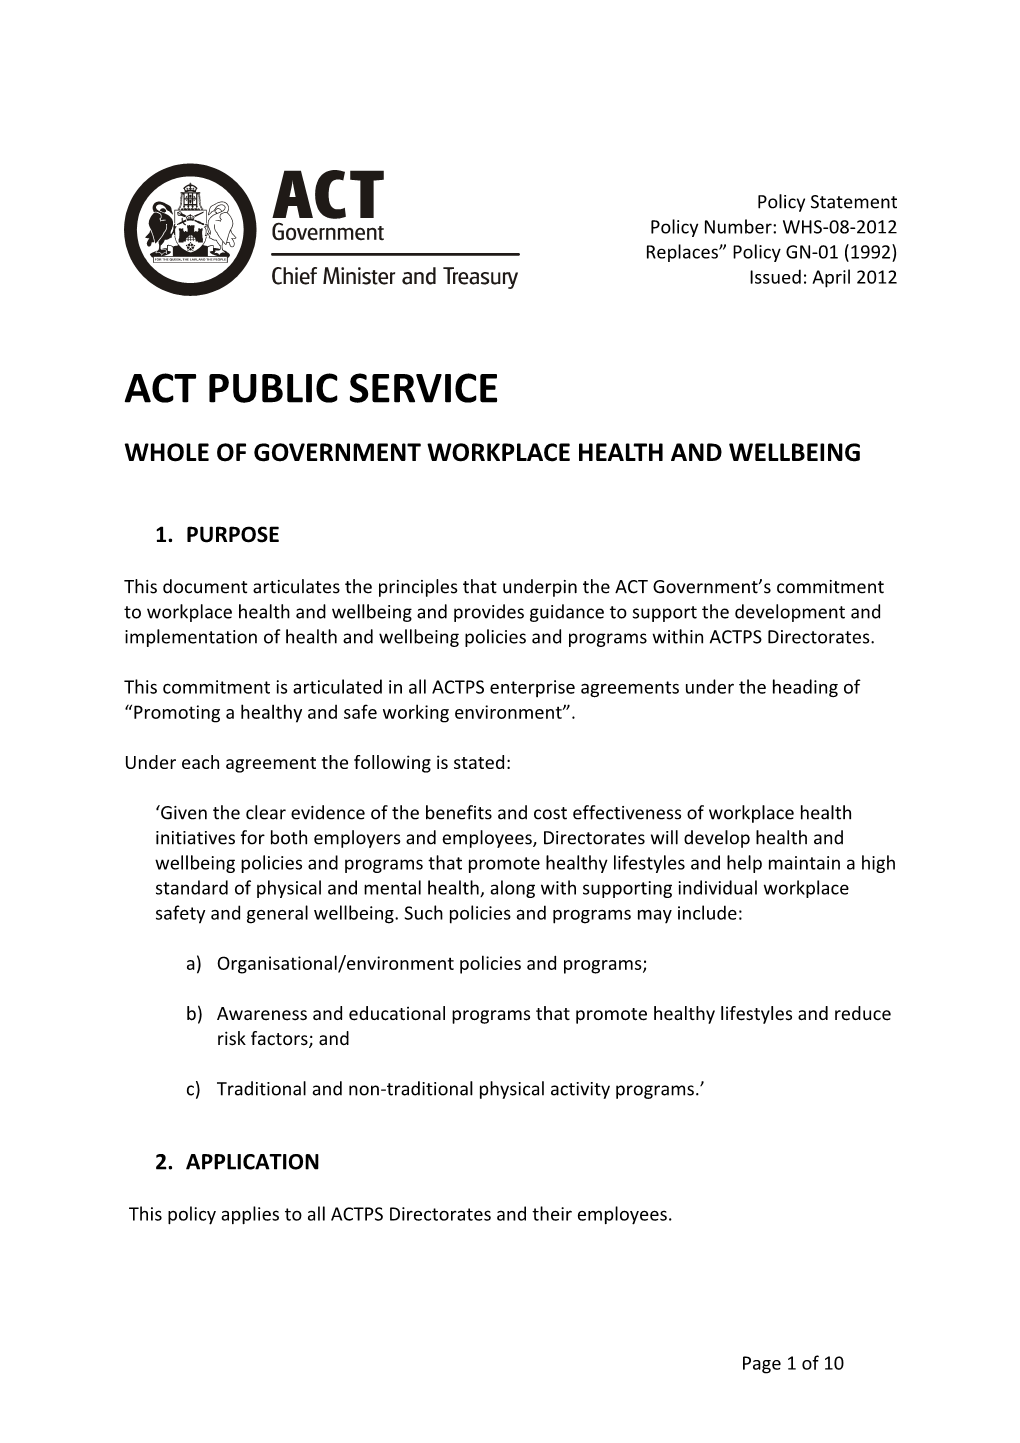 Whole of Government Workplace Health and Wellbeing